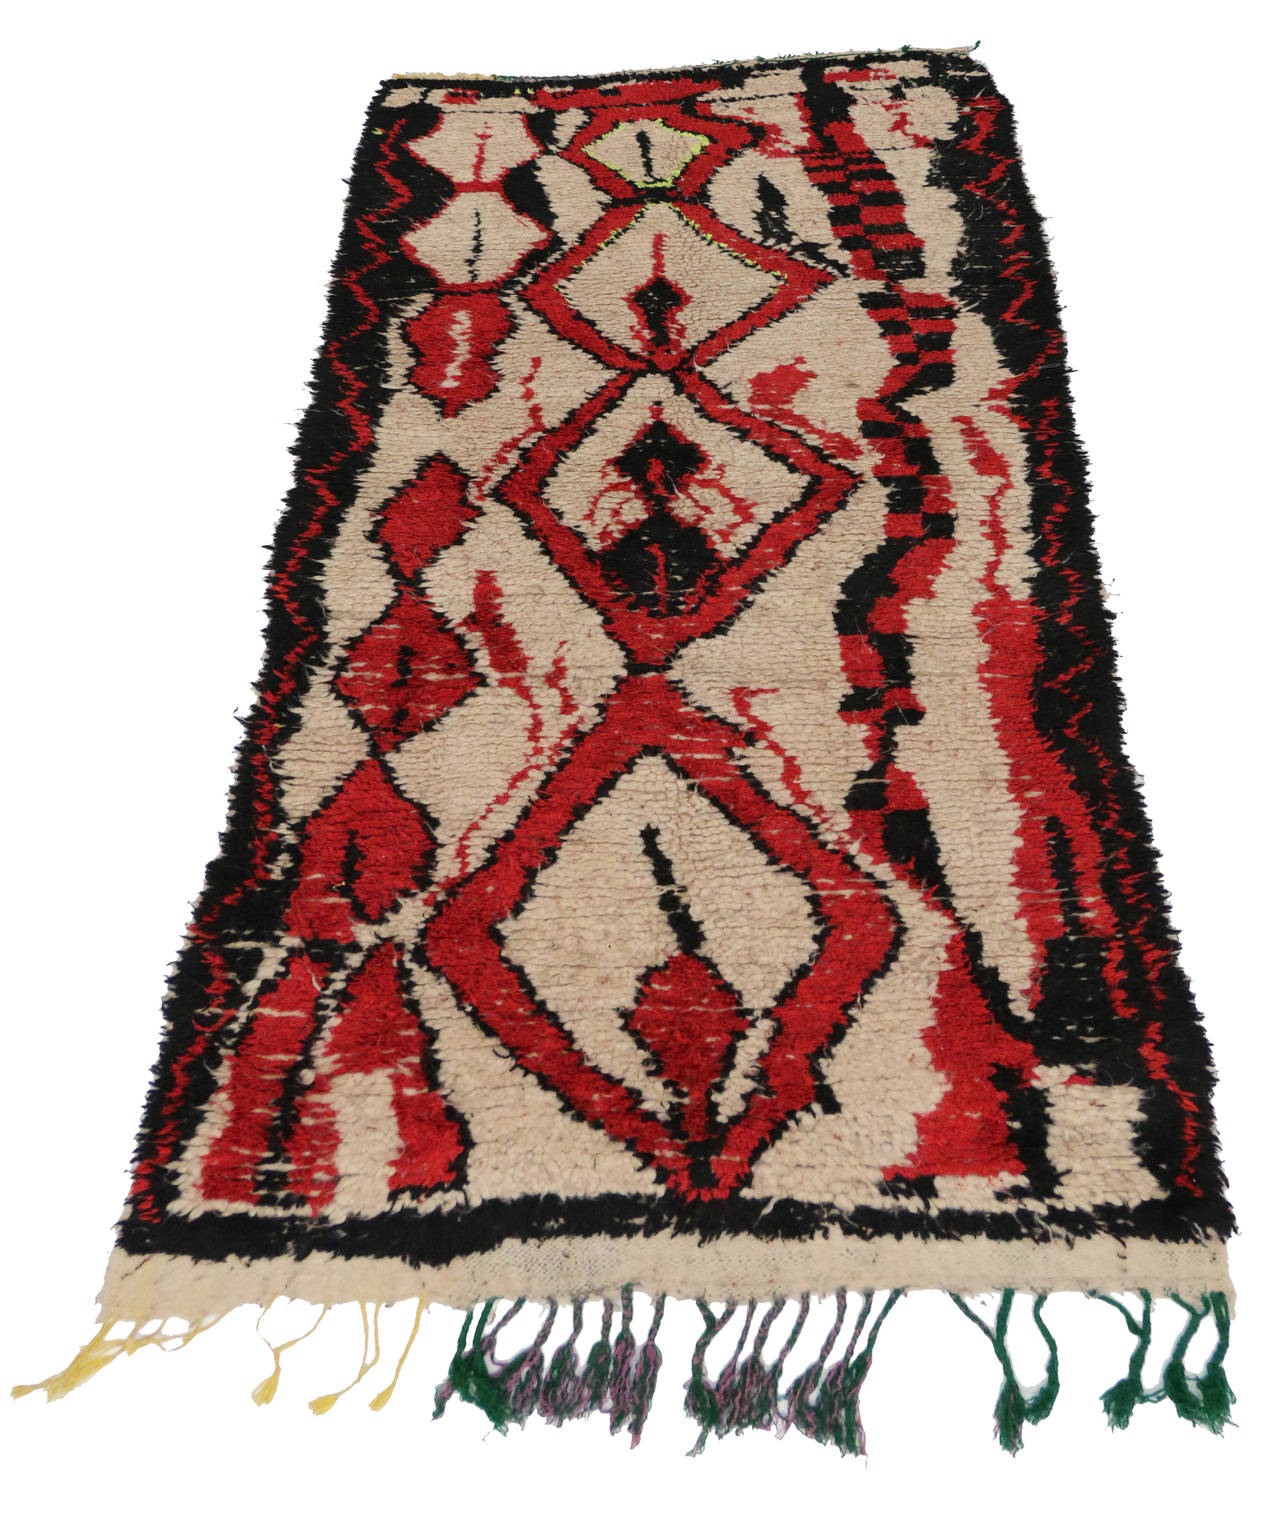 Wool Mid-Century Modern Berber Moroccan Carpet Runner with Abstract Tribal Design